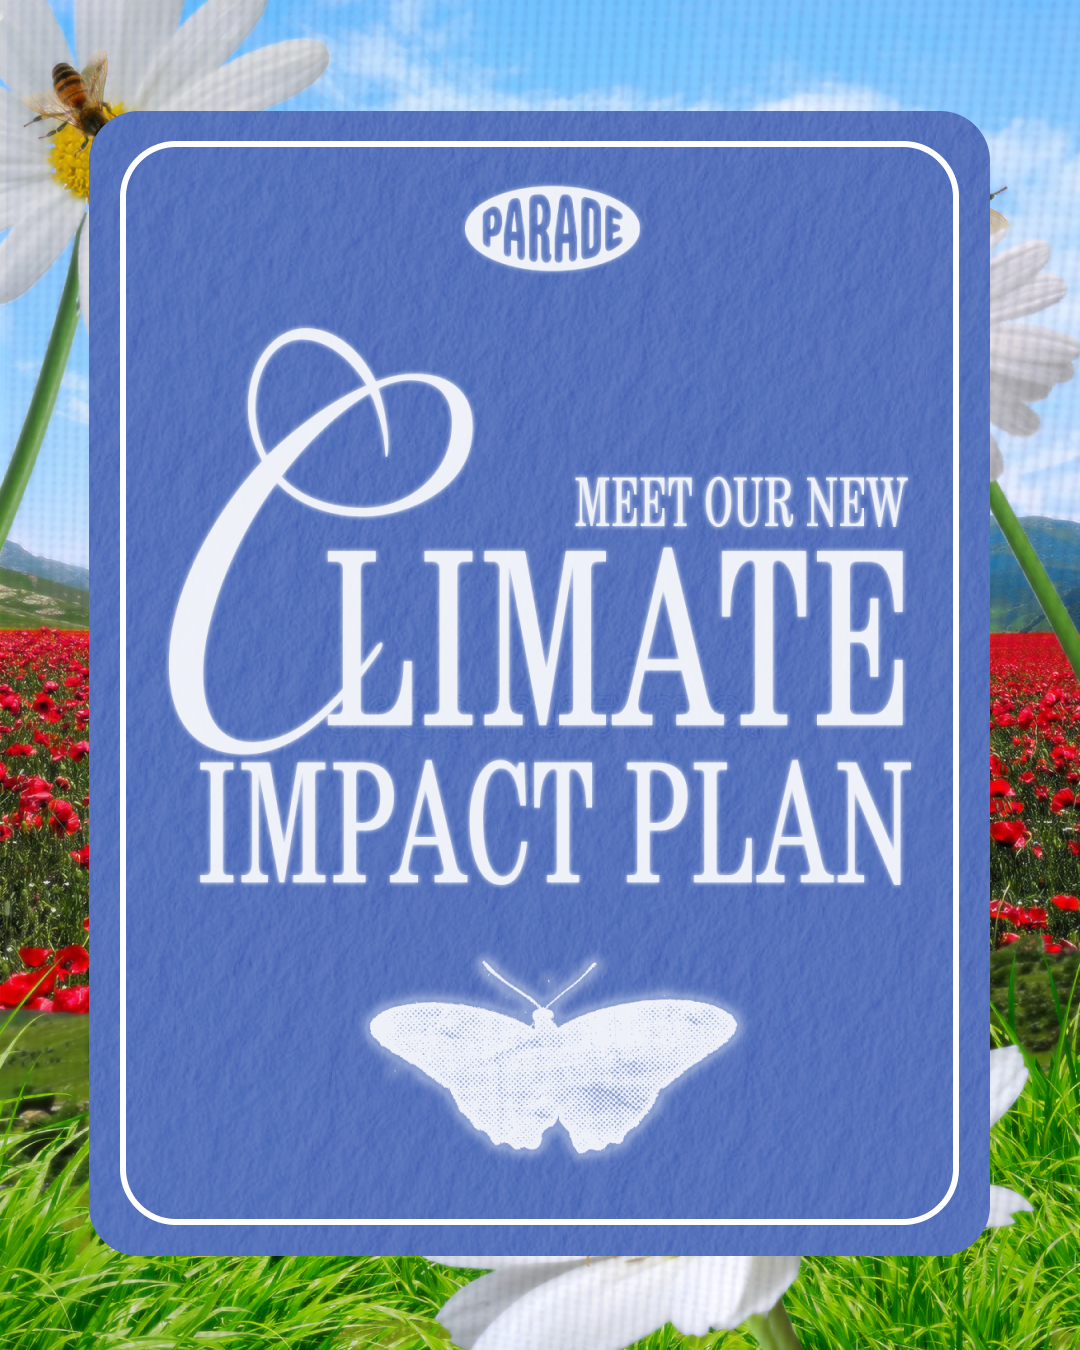 Our Climate Impact Plan